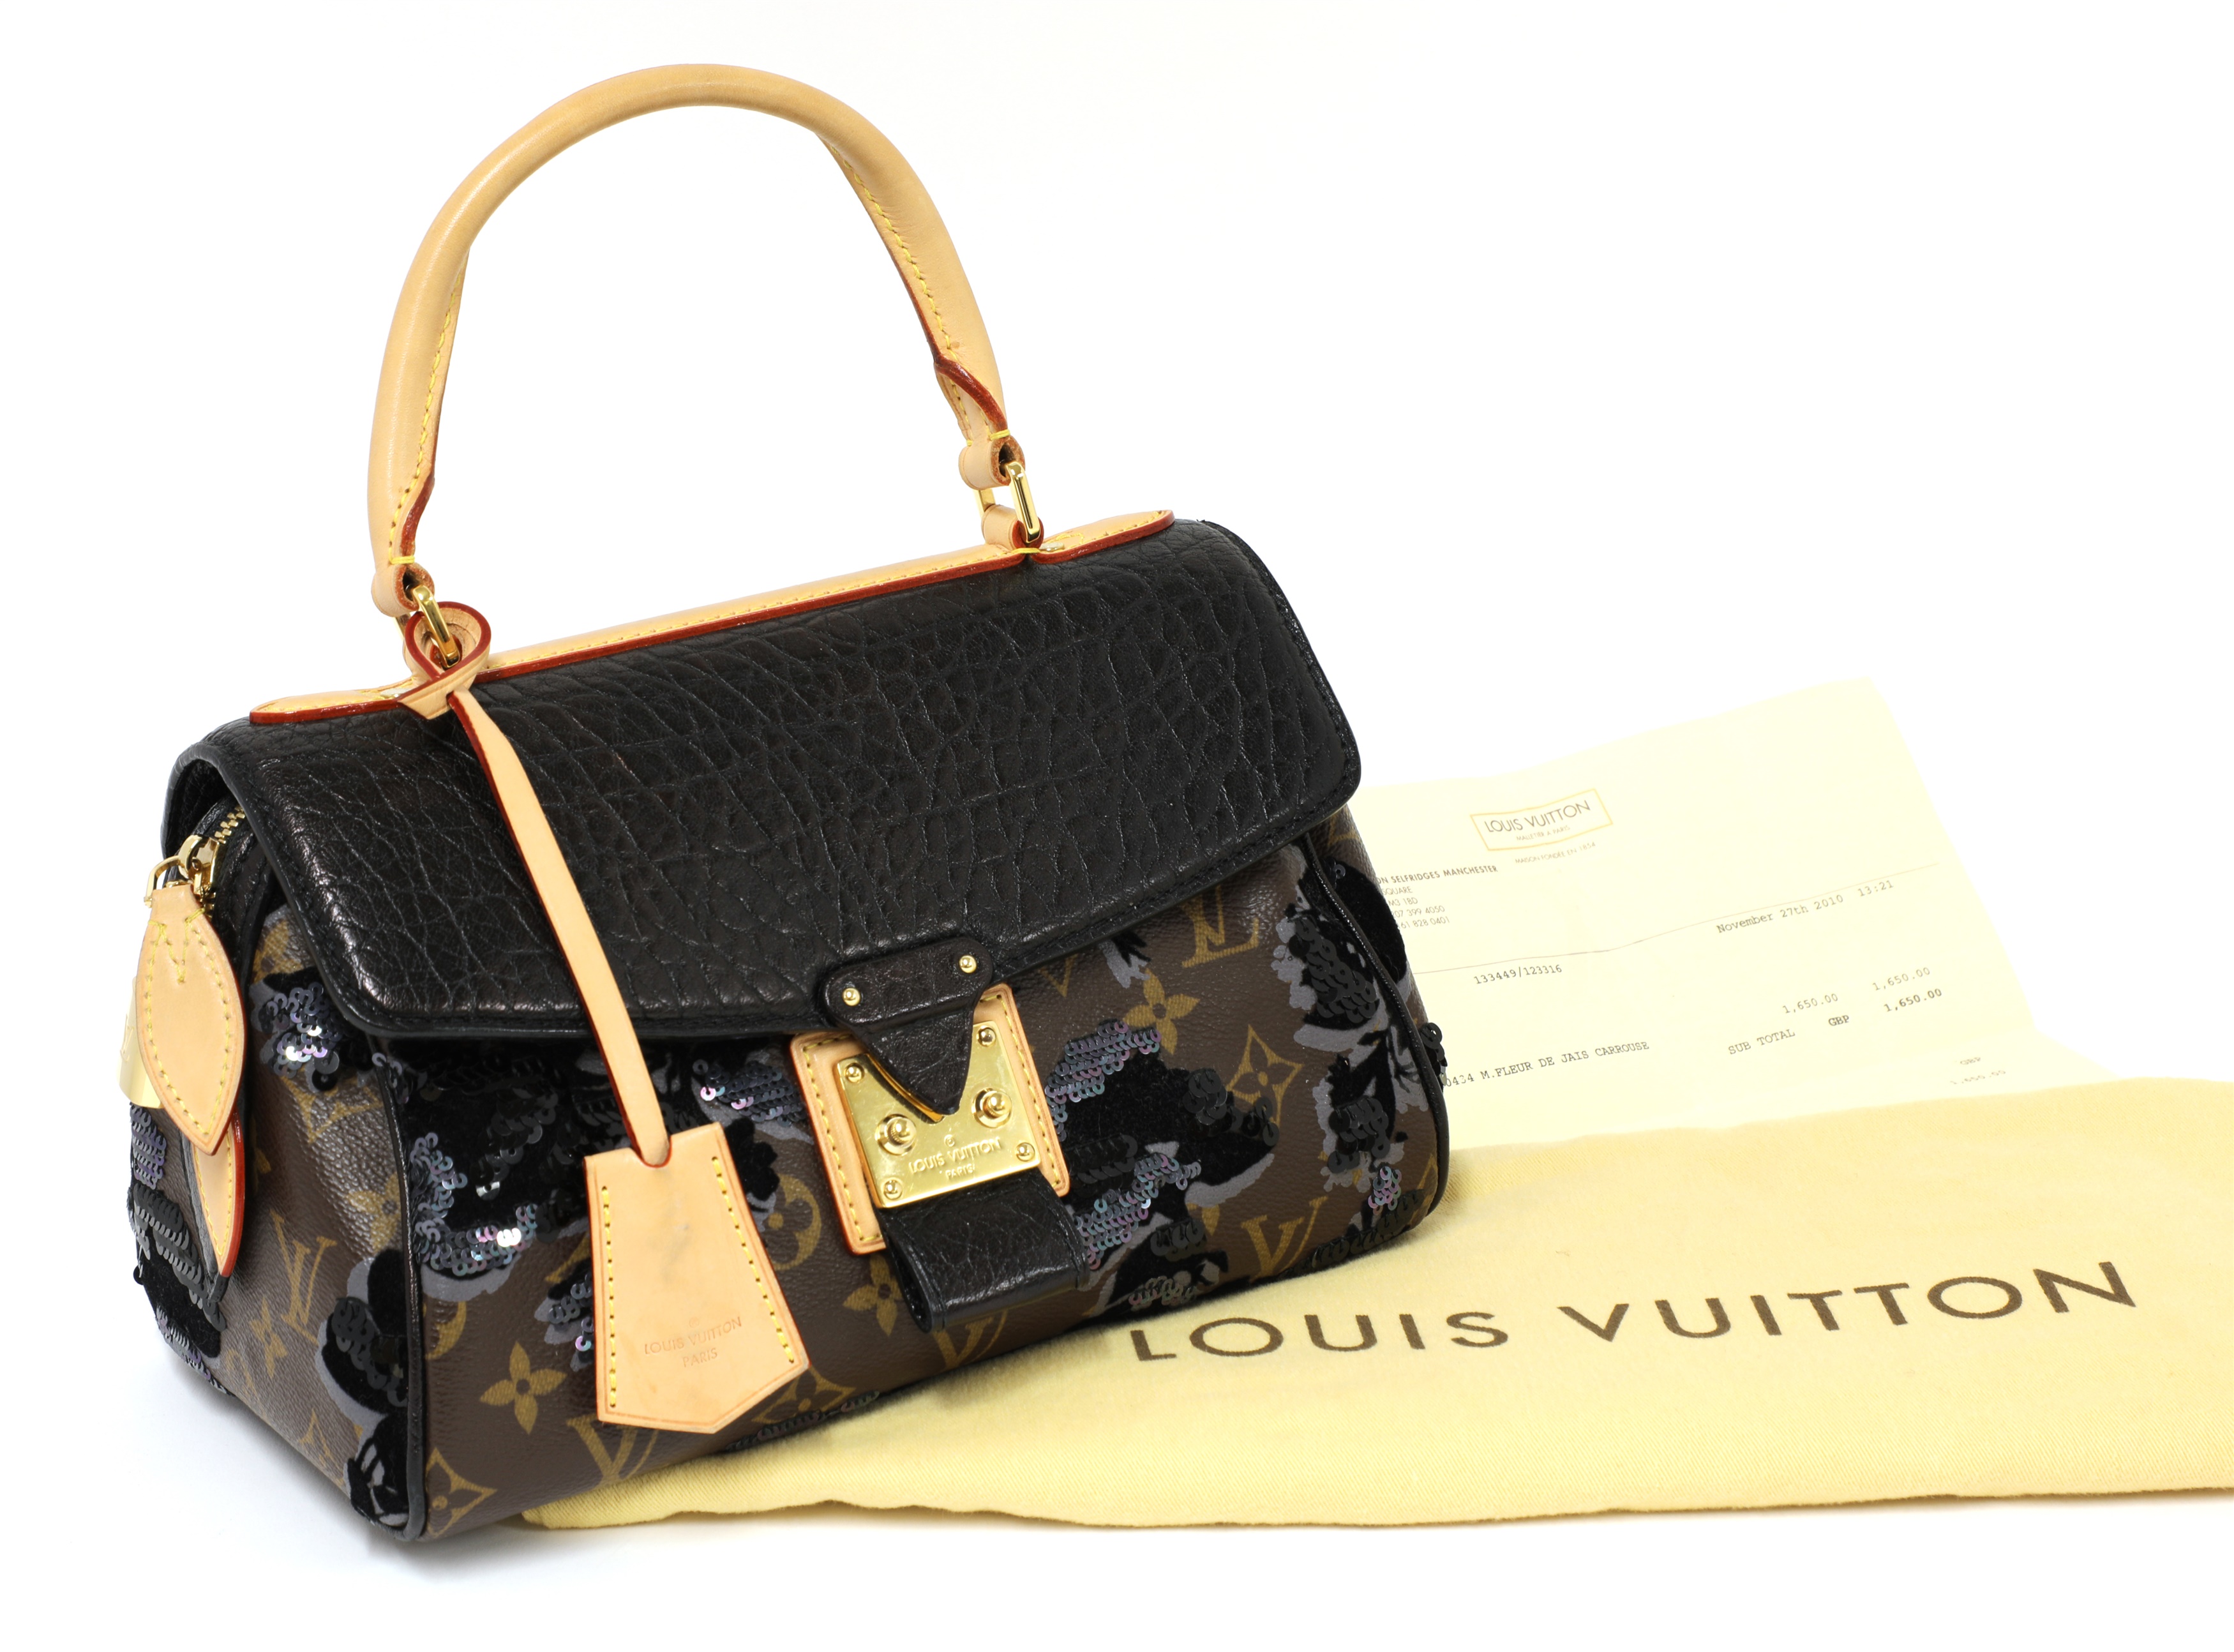 Authentic Limited Edition Louis Vuitton Handbag with Jeweled Tassels